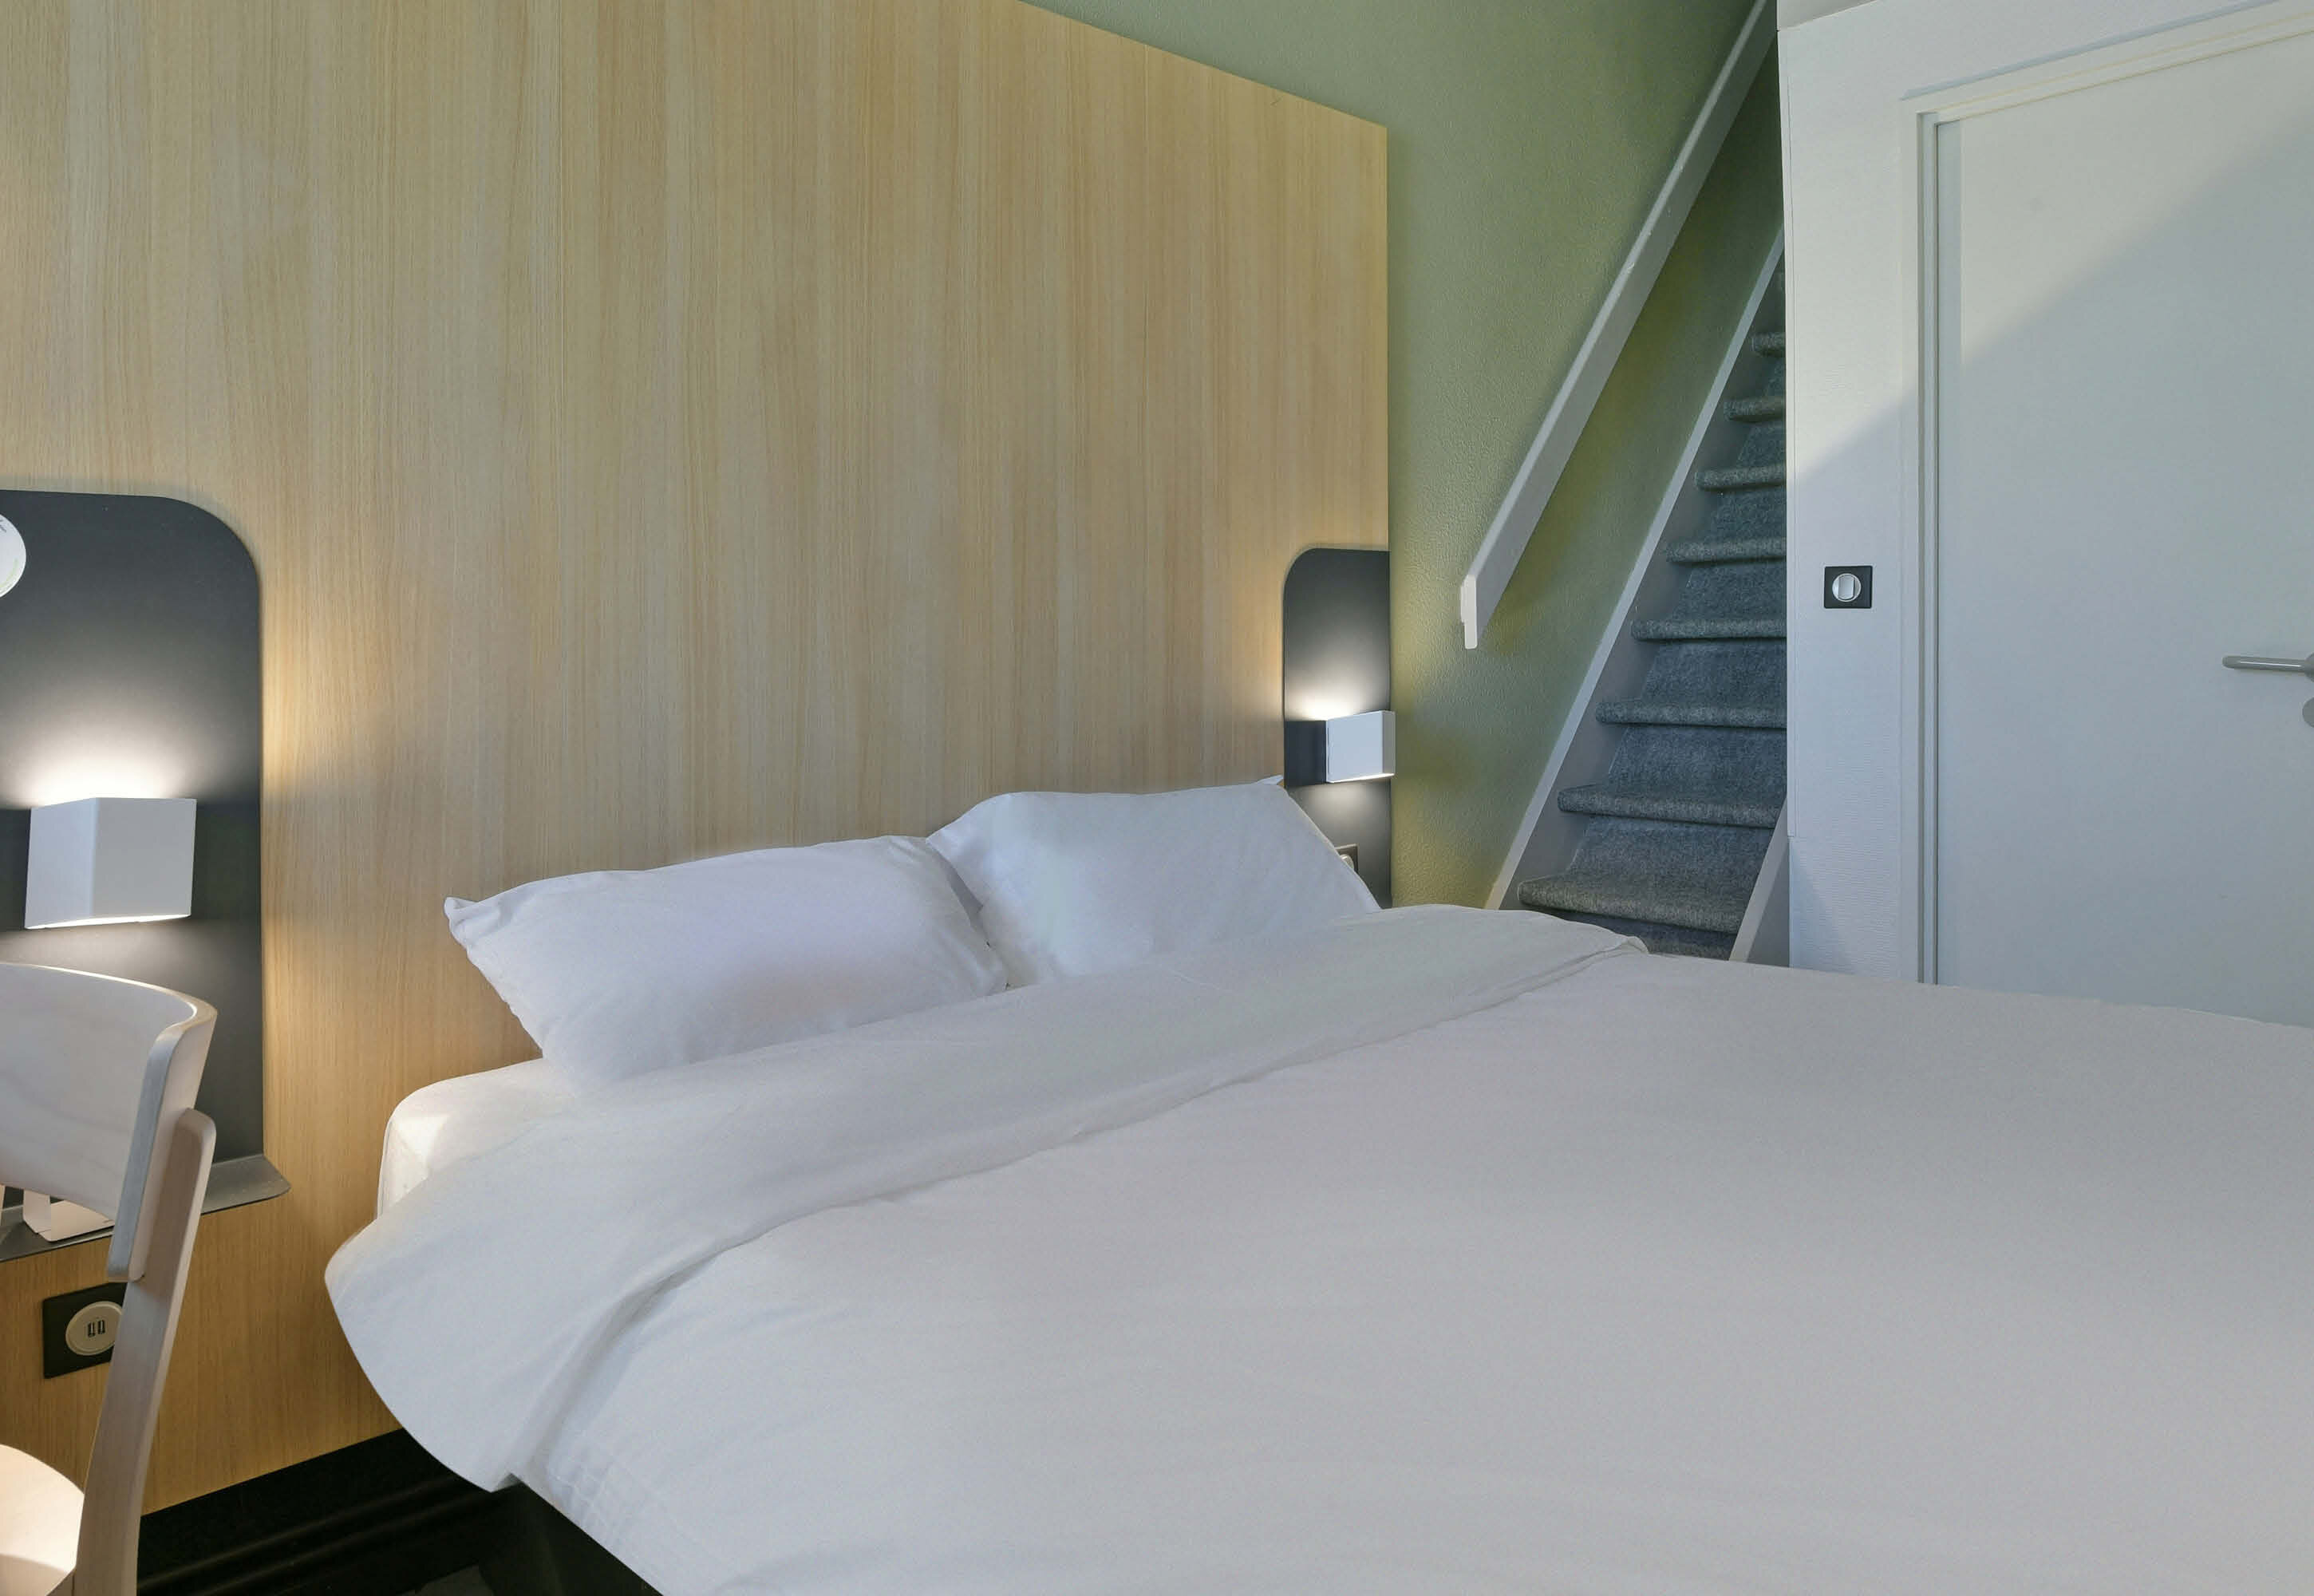 Images B&B HOTEL Le Mans Nord 2